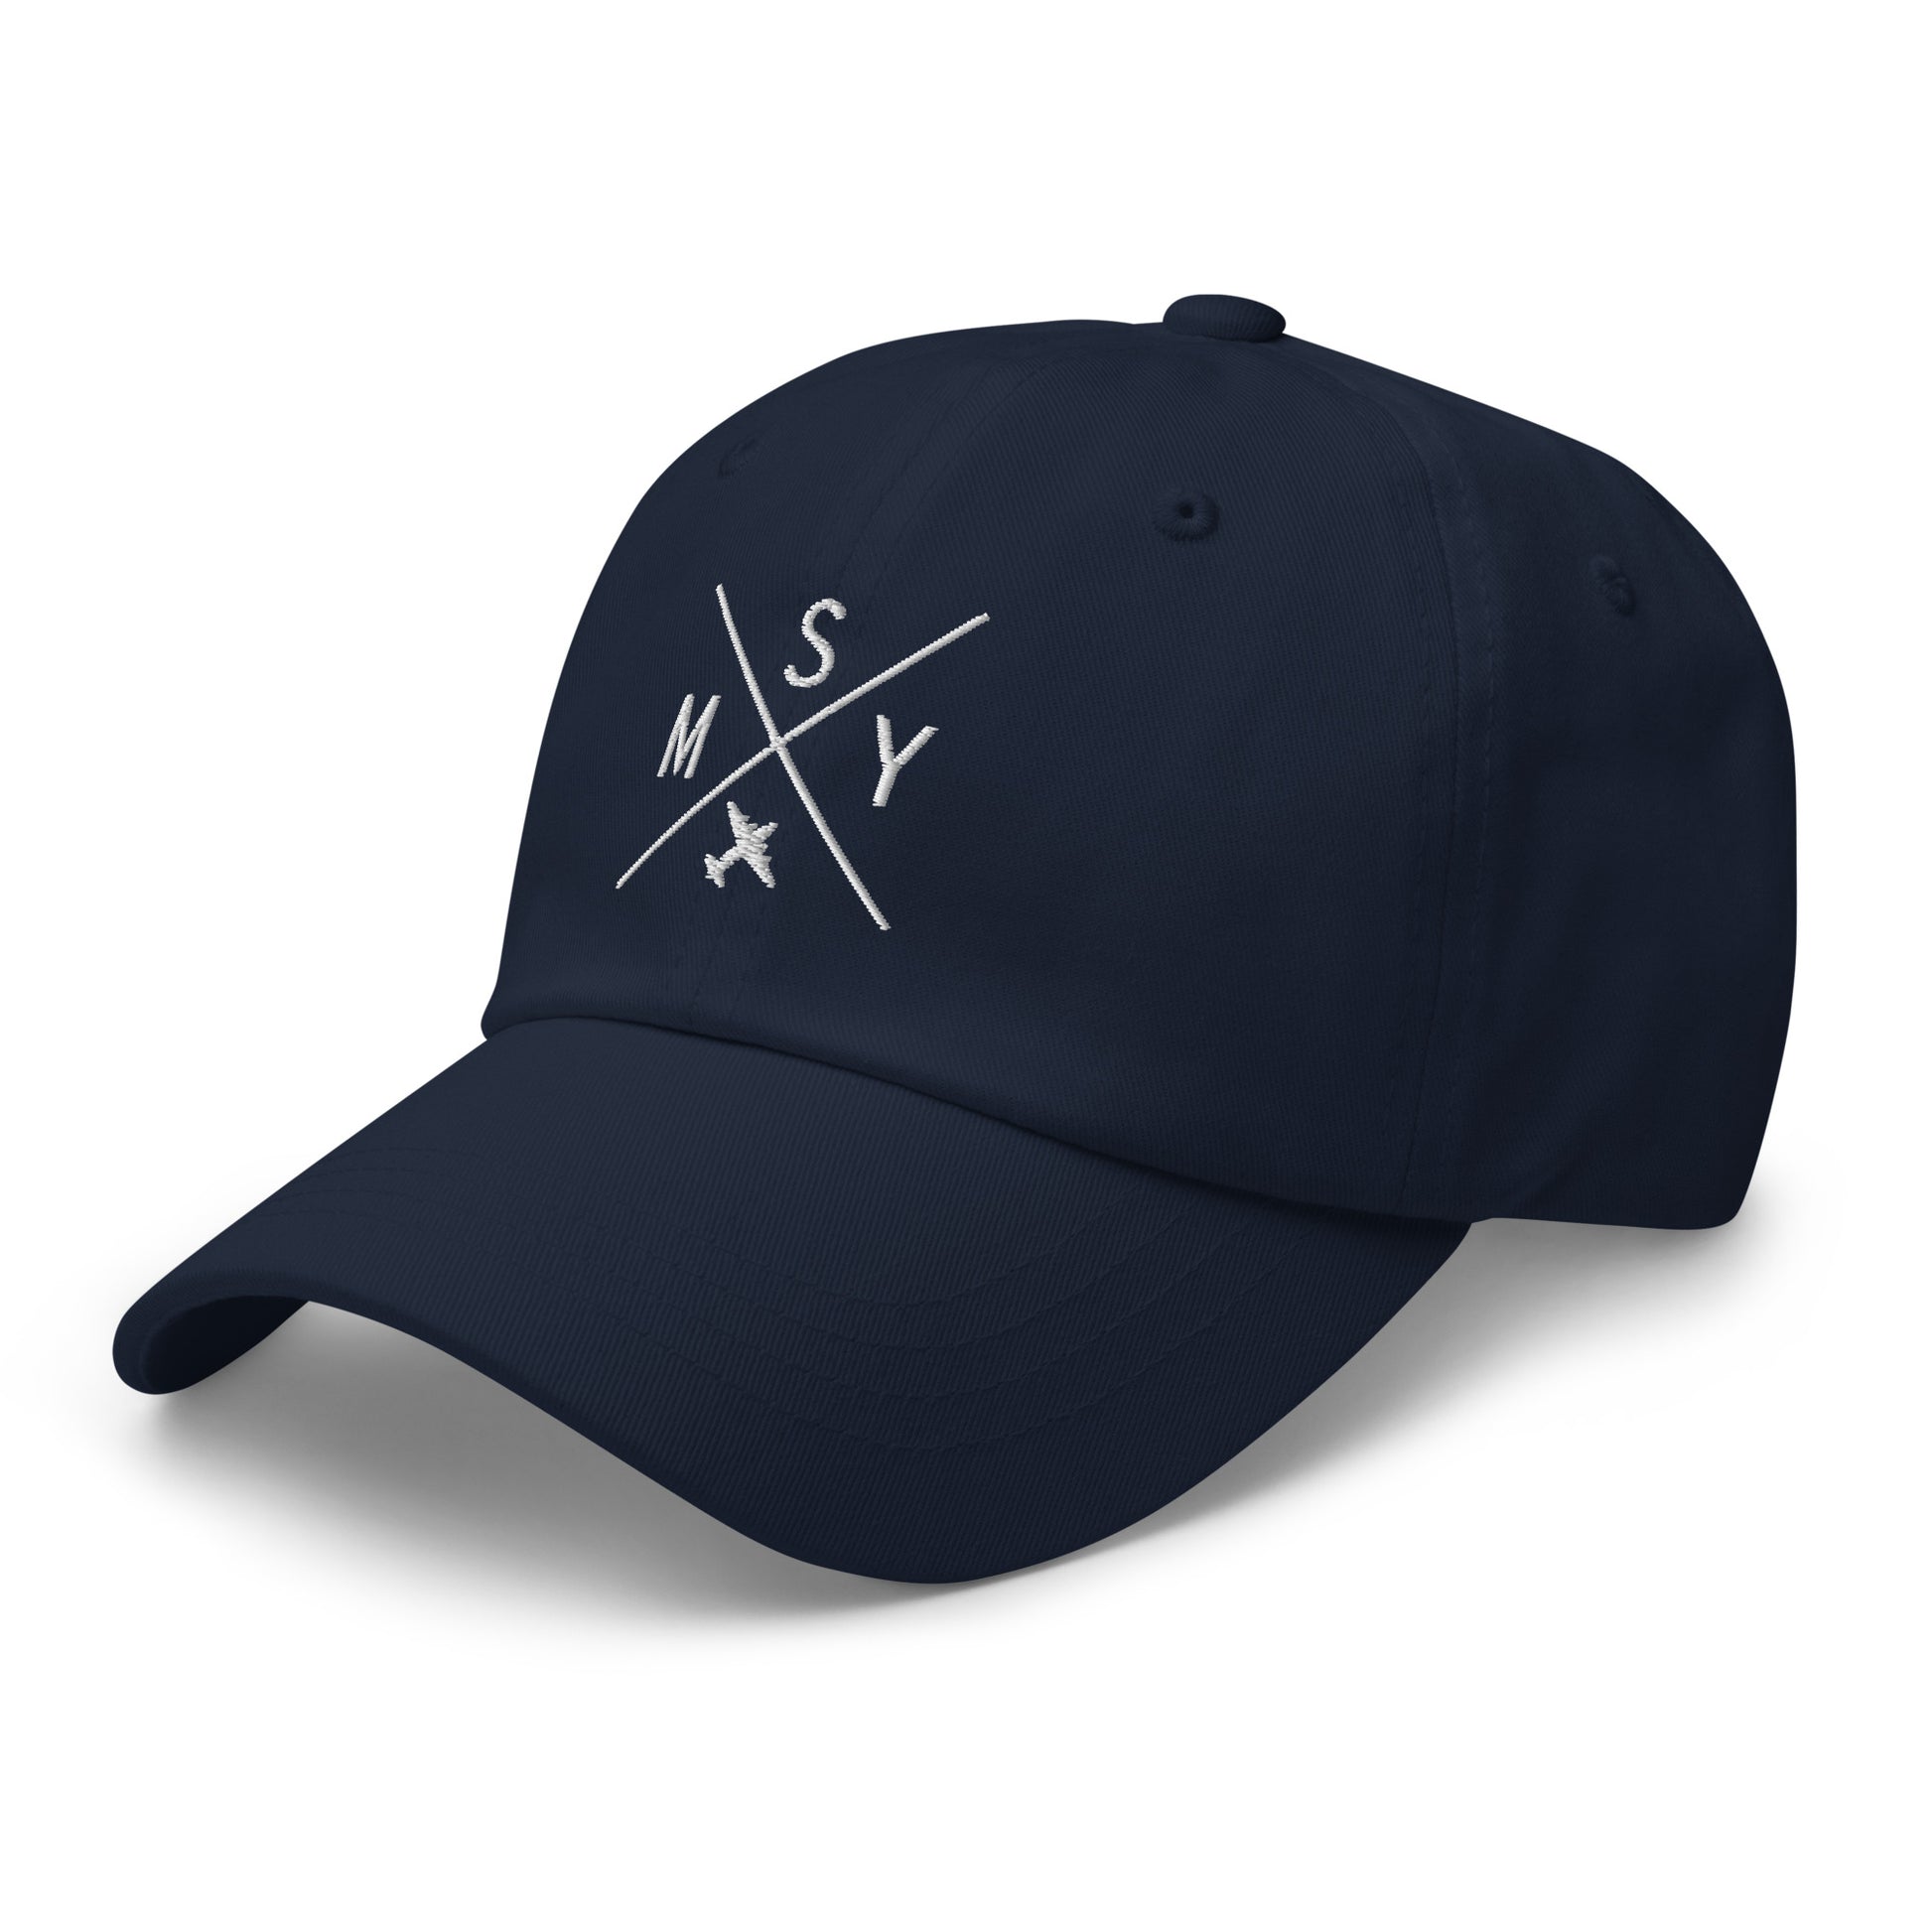 Crossed-X Dad Hat - White • MSY New Orleans • YHM Designs - Image 18